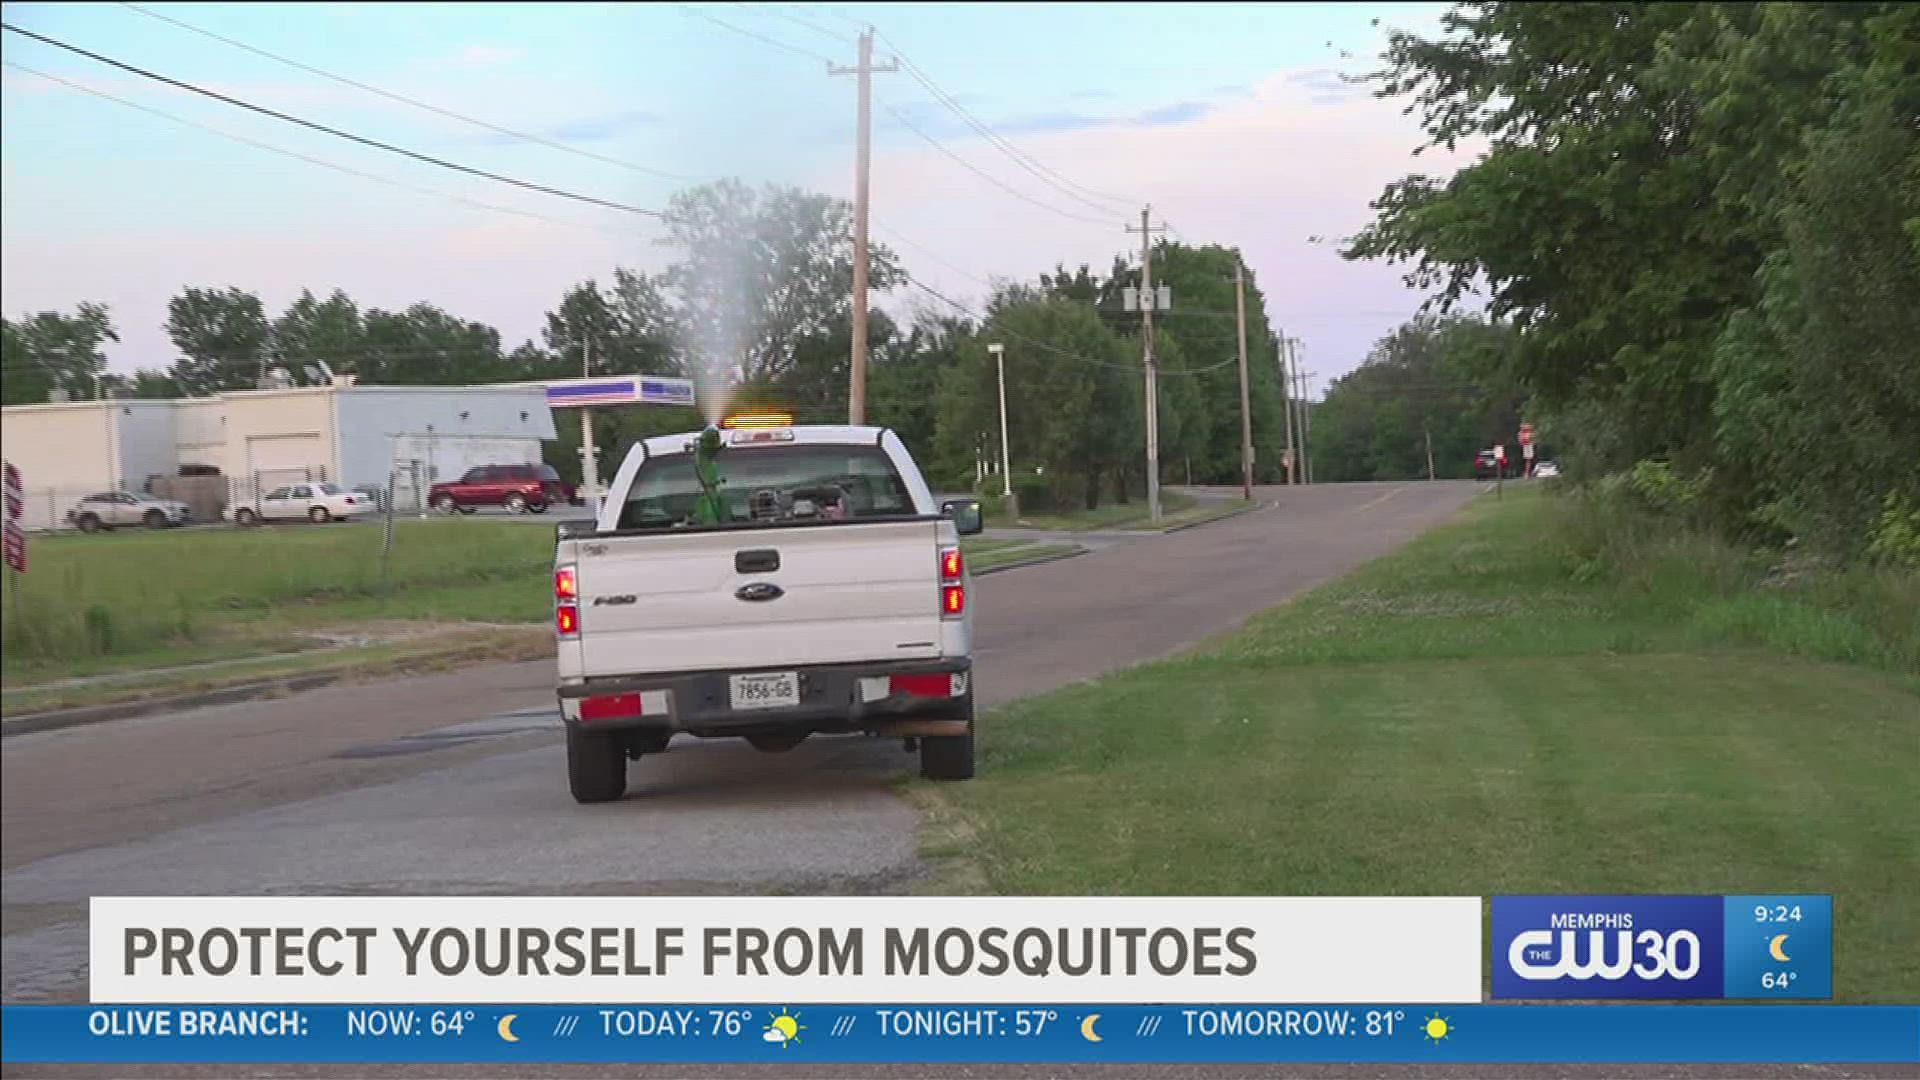 Shelby County Vector Control has been treating different zip codes for mosquitoes and checking them for viruses.